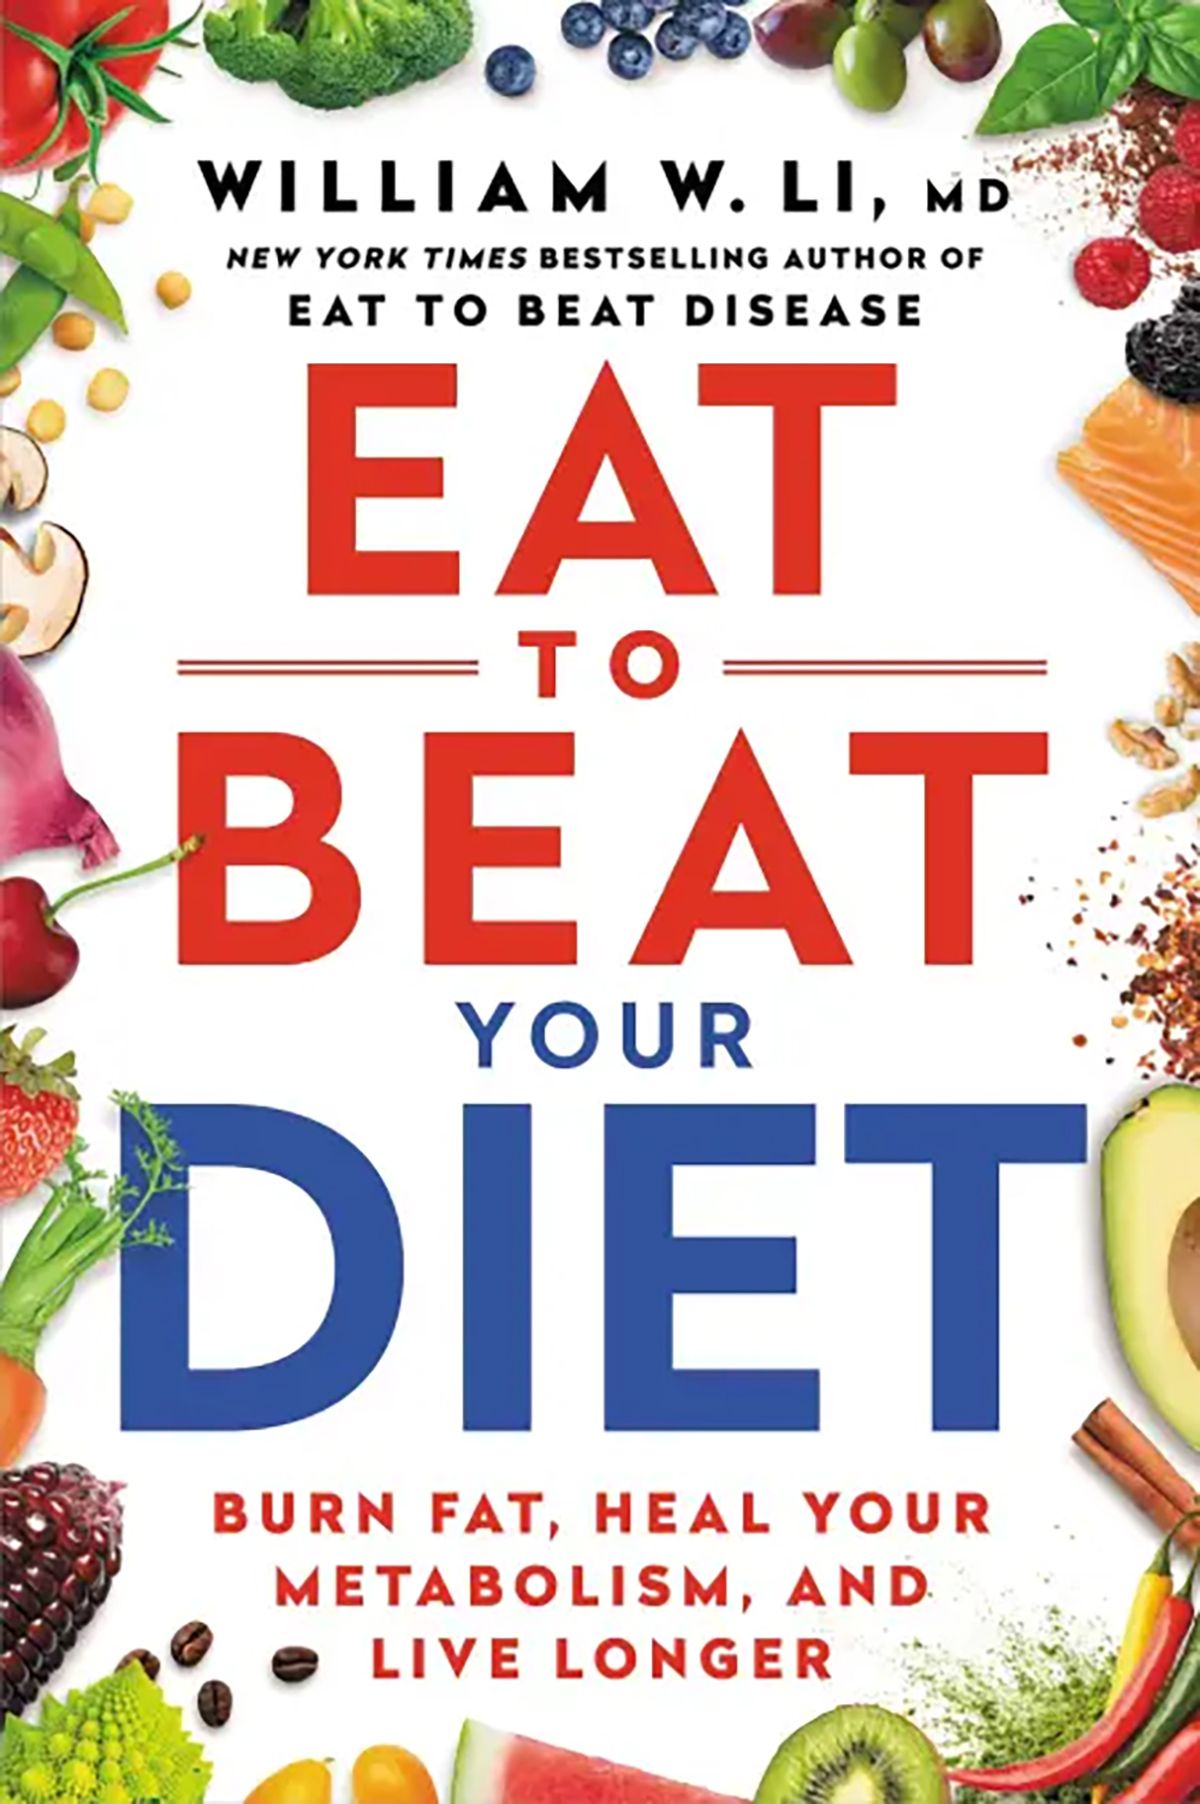 "Eat to Beat Your Diet: Burn Fat, Heal Your Metabolism, and Live Longer" by William W. Li. (Grand Central Publishing/TNS)  (Grand Central Publishing/TNS)